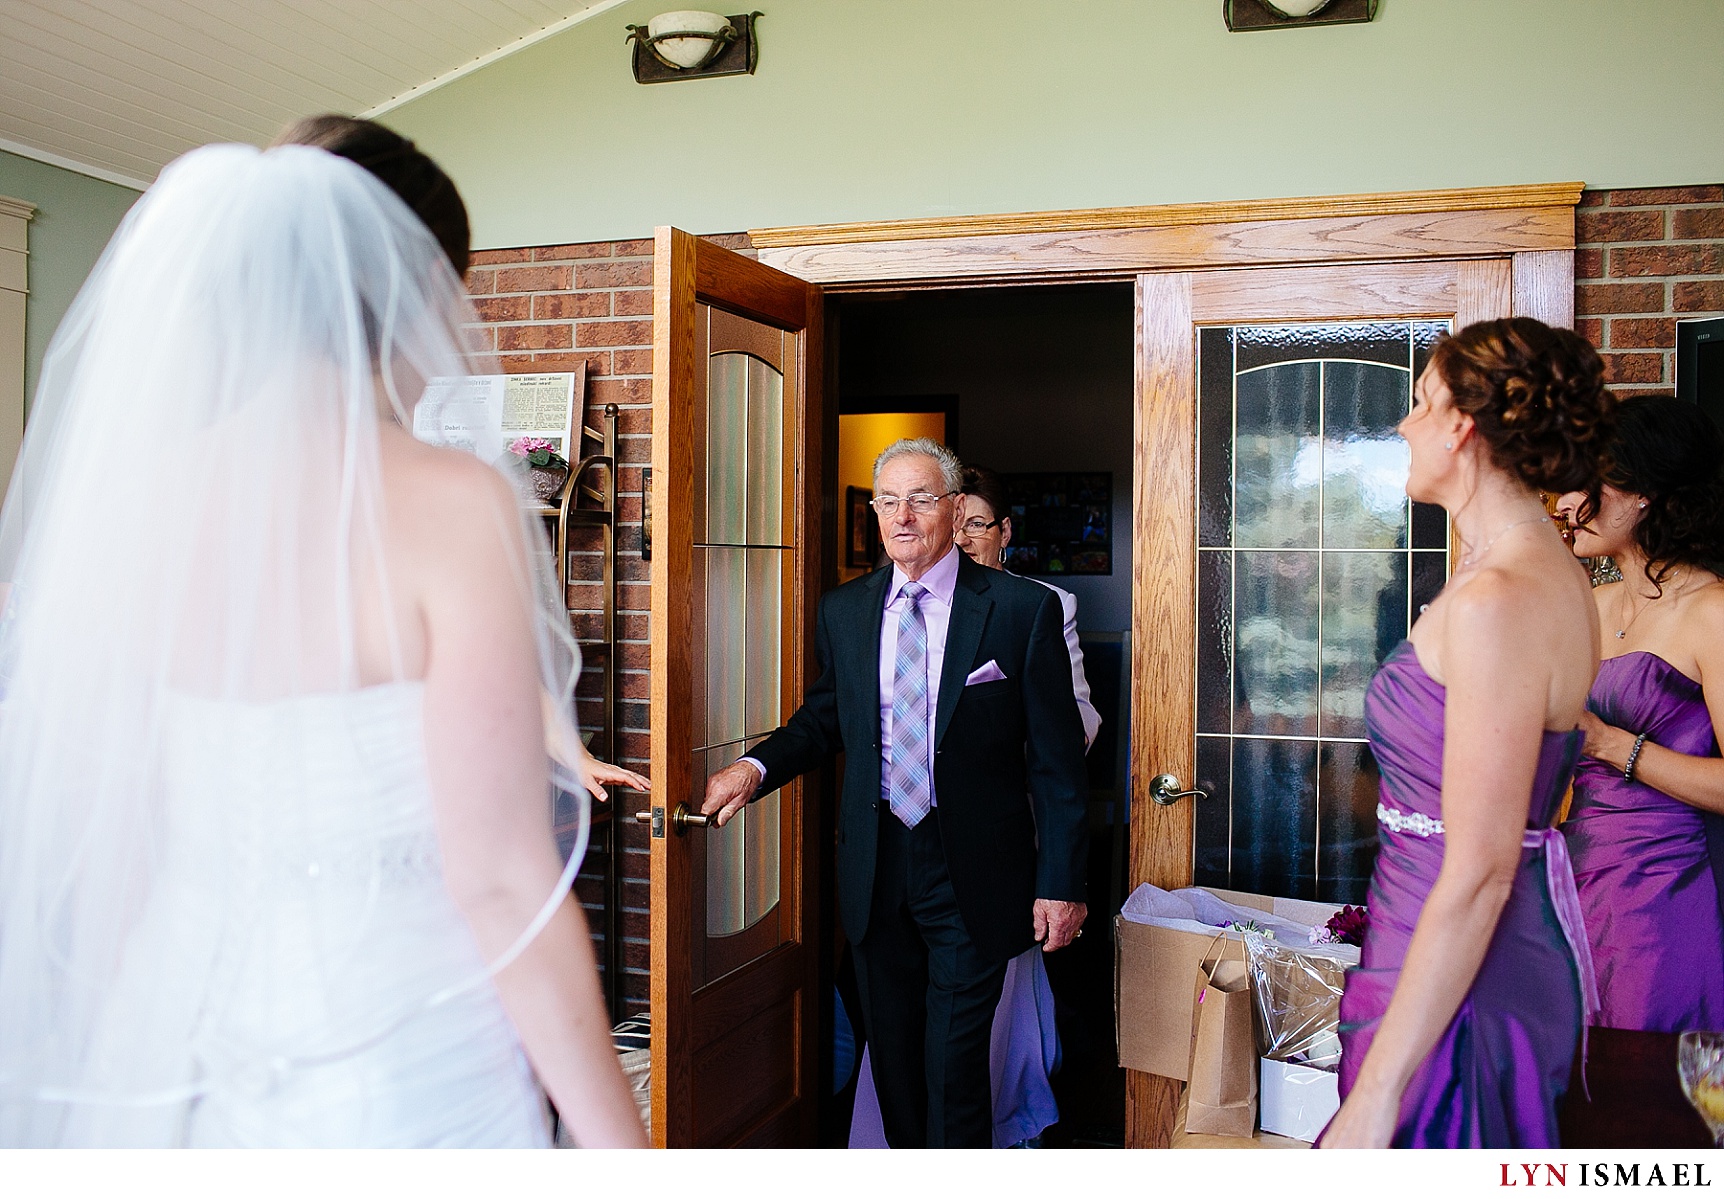 When the father of the bride waits until the bride is dressed as a bride.